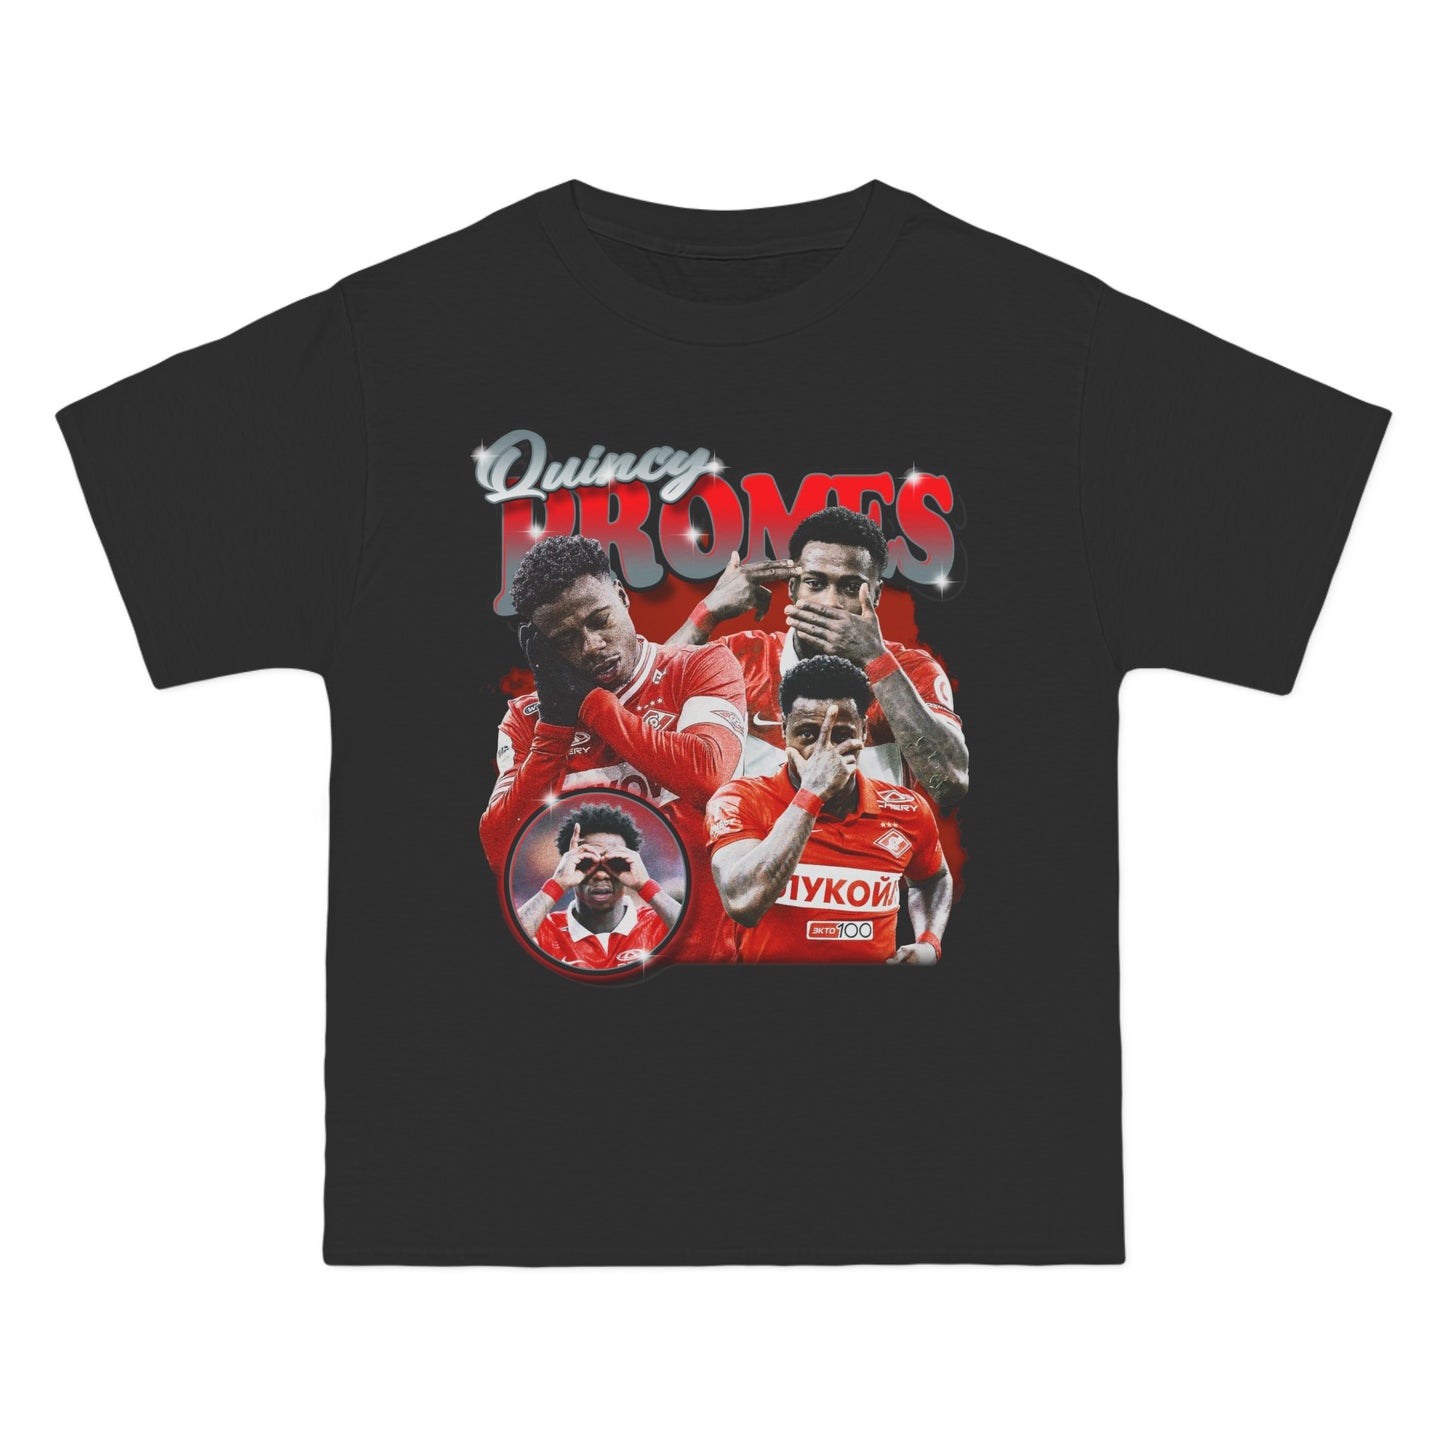 Quincy Promes Spartak Moscow Graphic T-Shirt